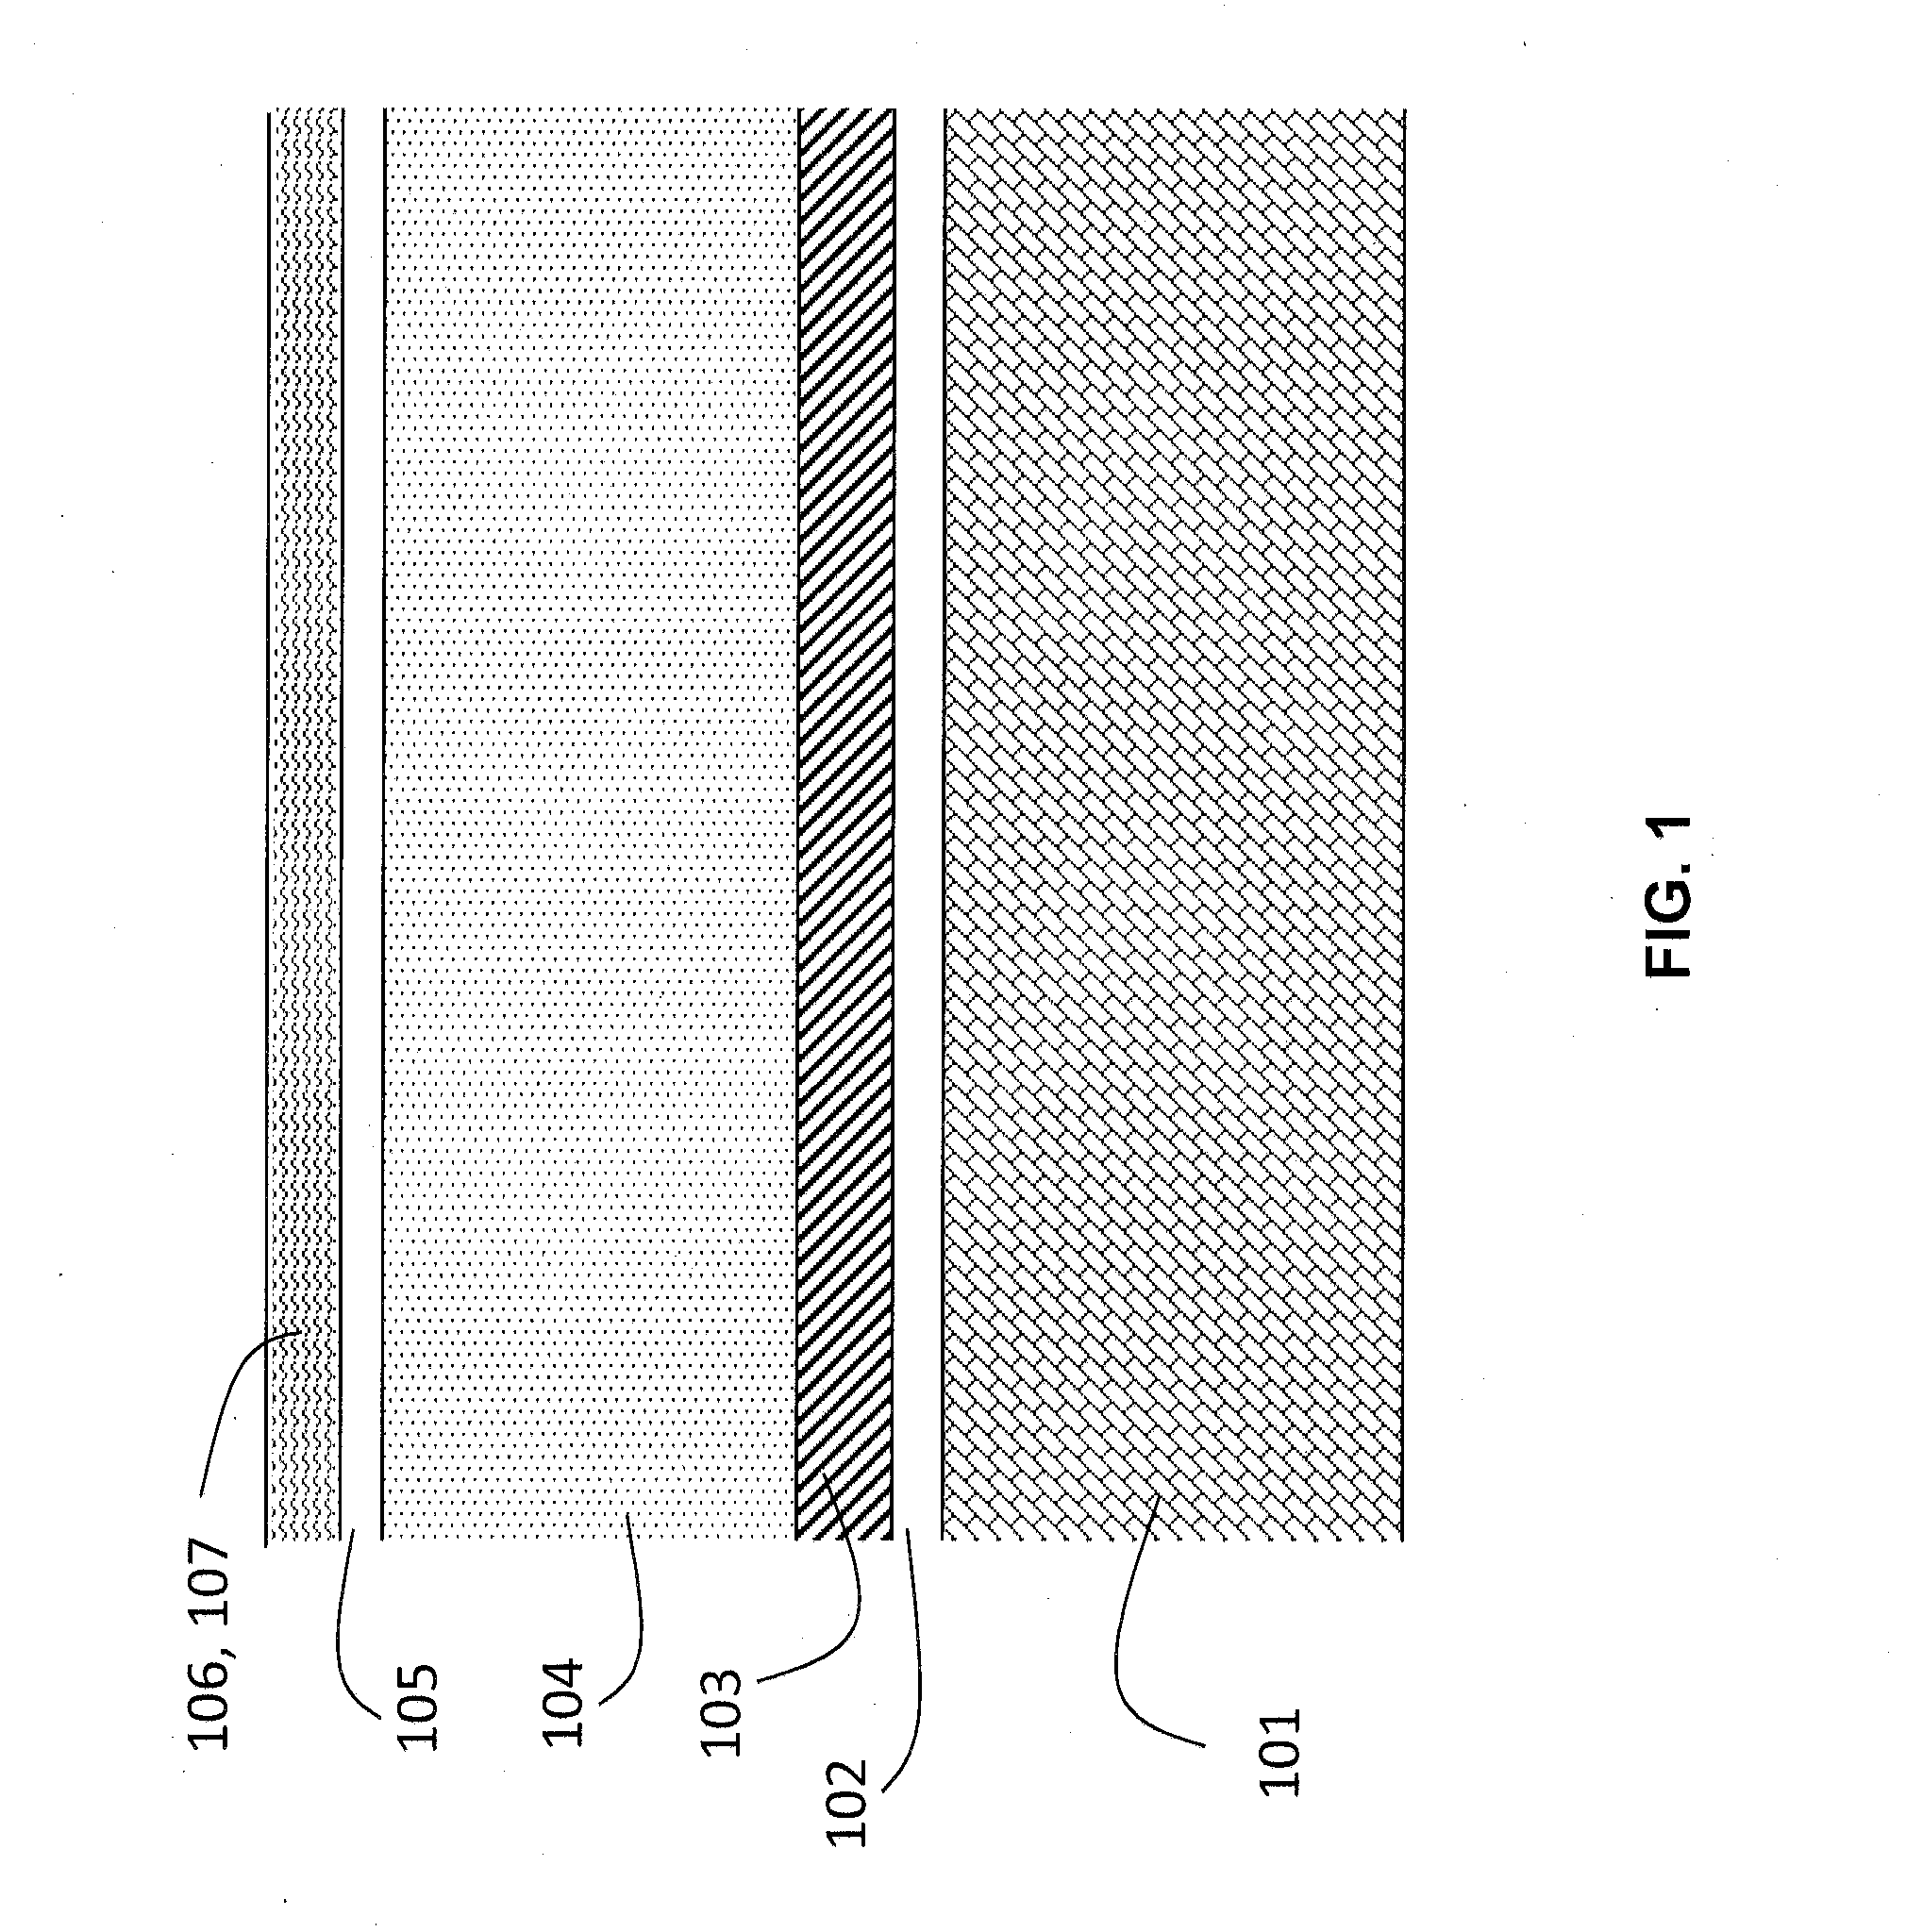 Passivated Emitter Rear Locally Patterned Epitaxial Solar Cell